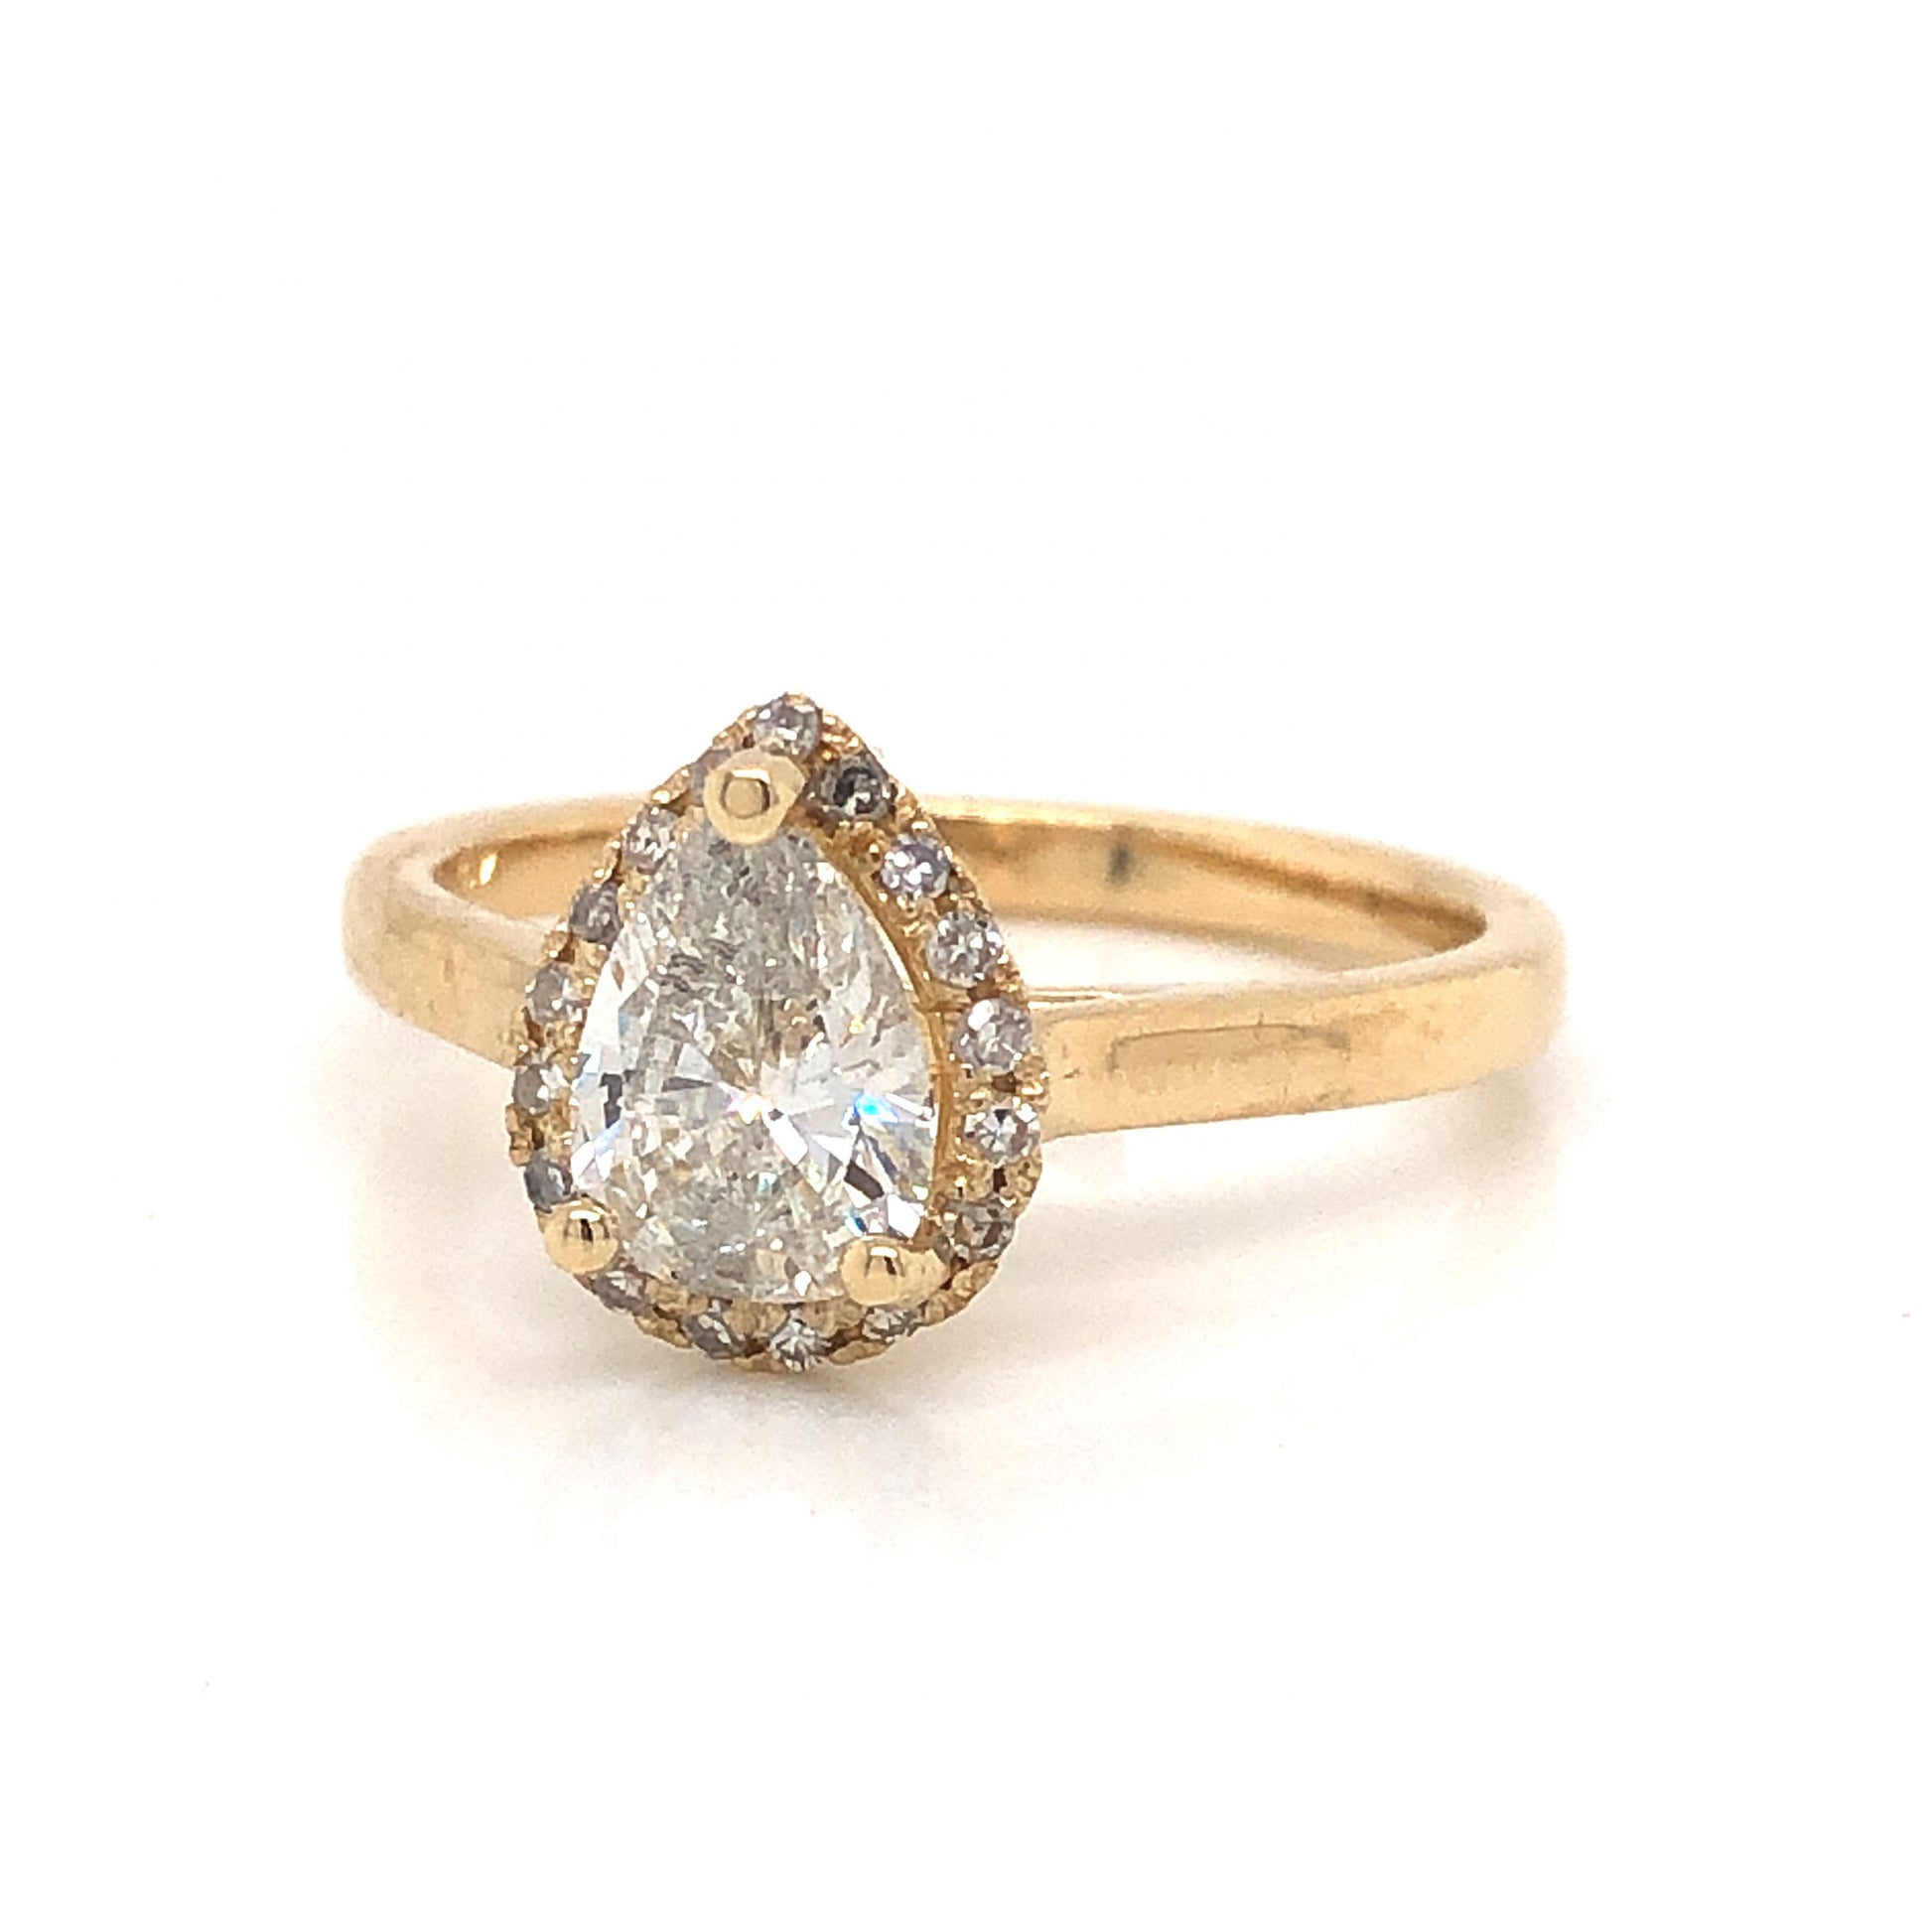 Pear Cut Diamond Halo Engagement Ring in 14k Yellow GoldComposition: 14 Karat Yellow Gold Ring Size: 7 Total Diamond Weight: .99ct Total Gram Weight: 3.2 g Inscription: 14k 
      